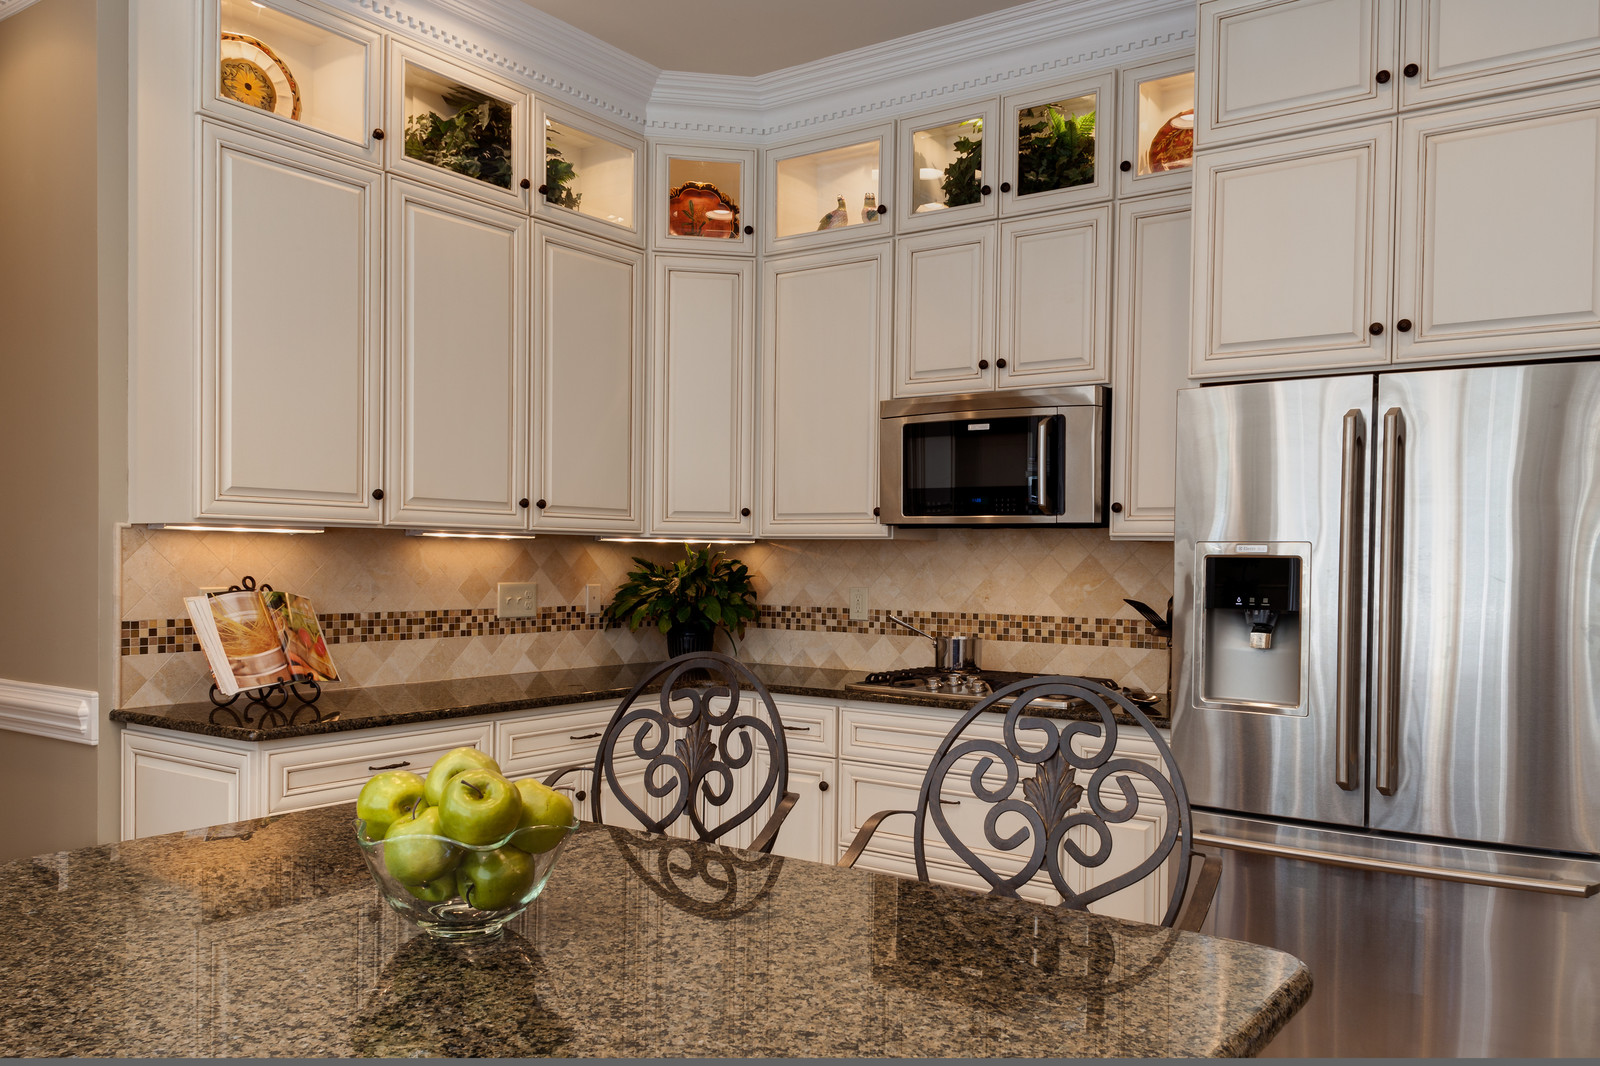 18 Most Elegant White Cabinets with Brown Granite You Must Look ...